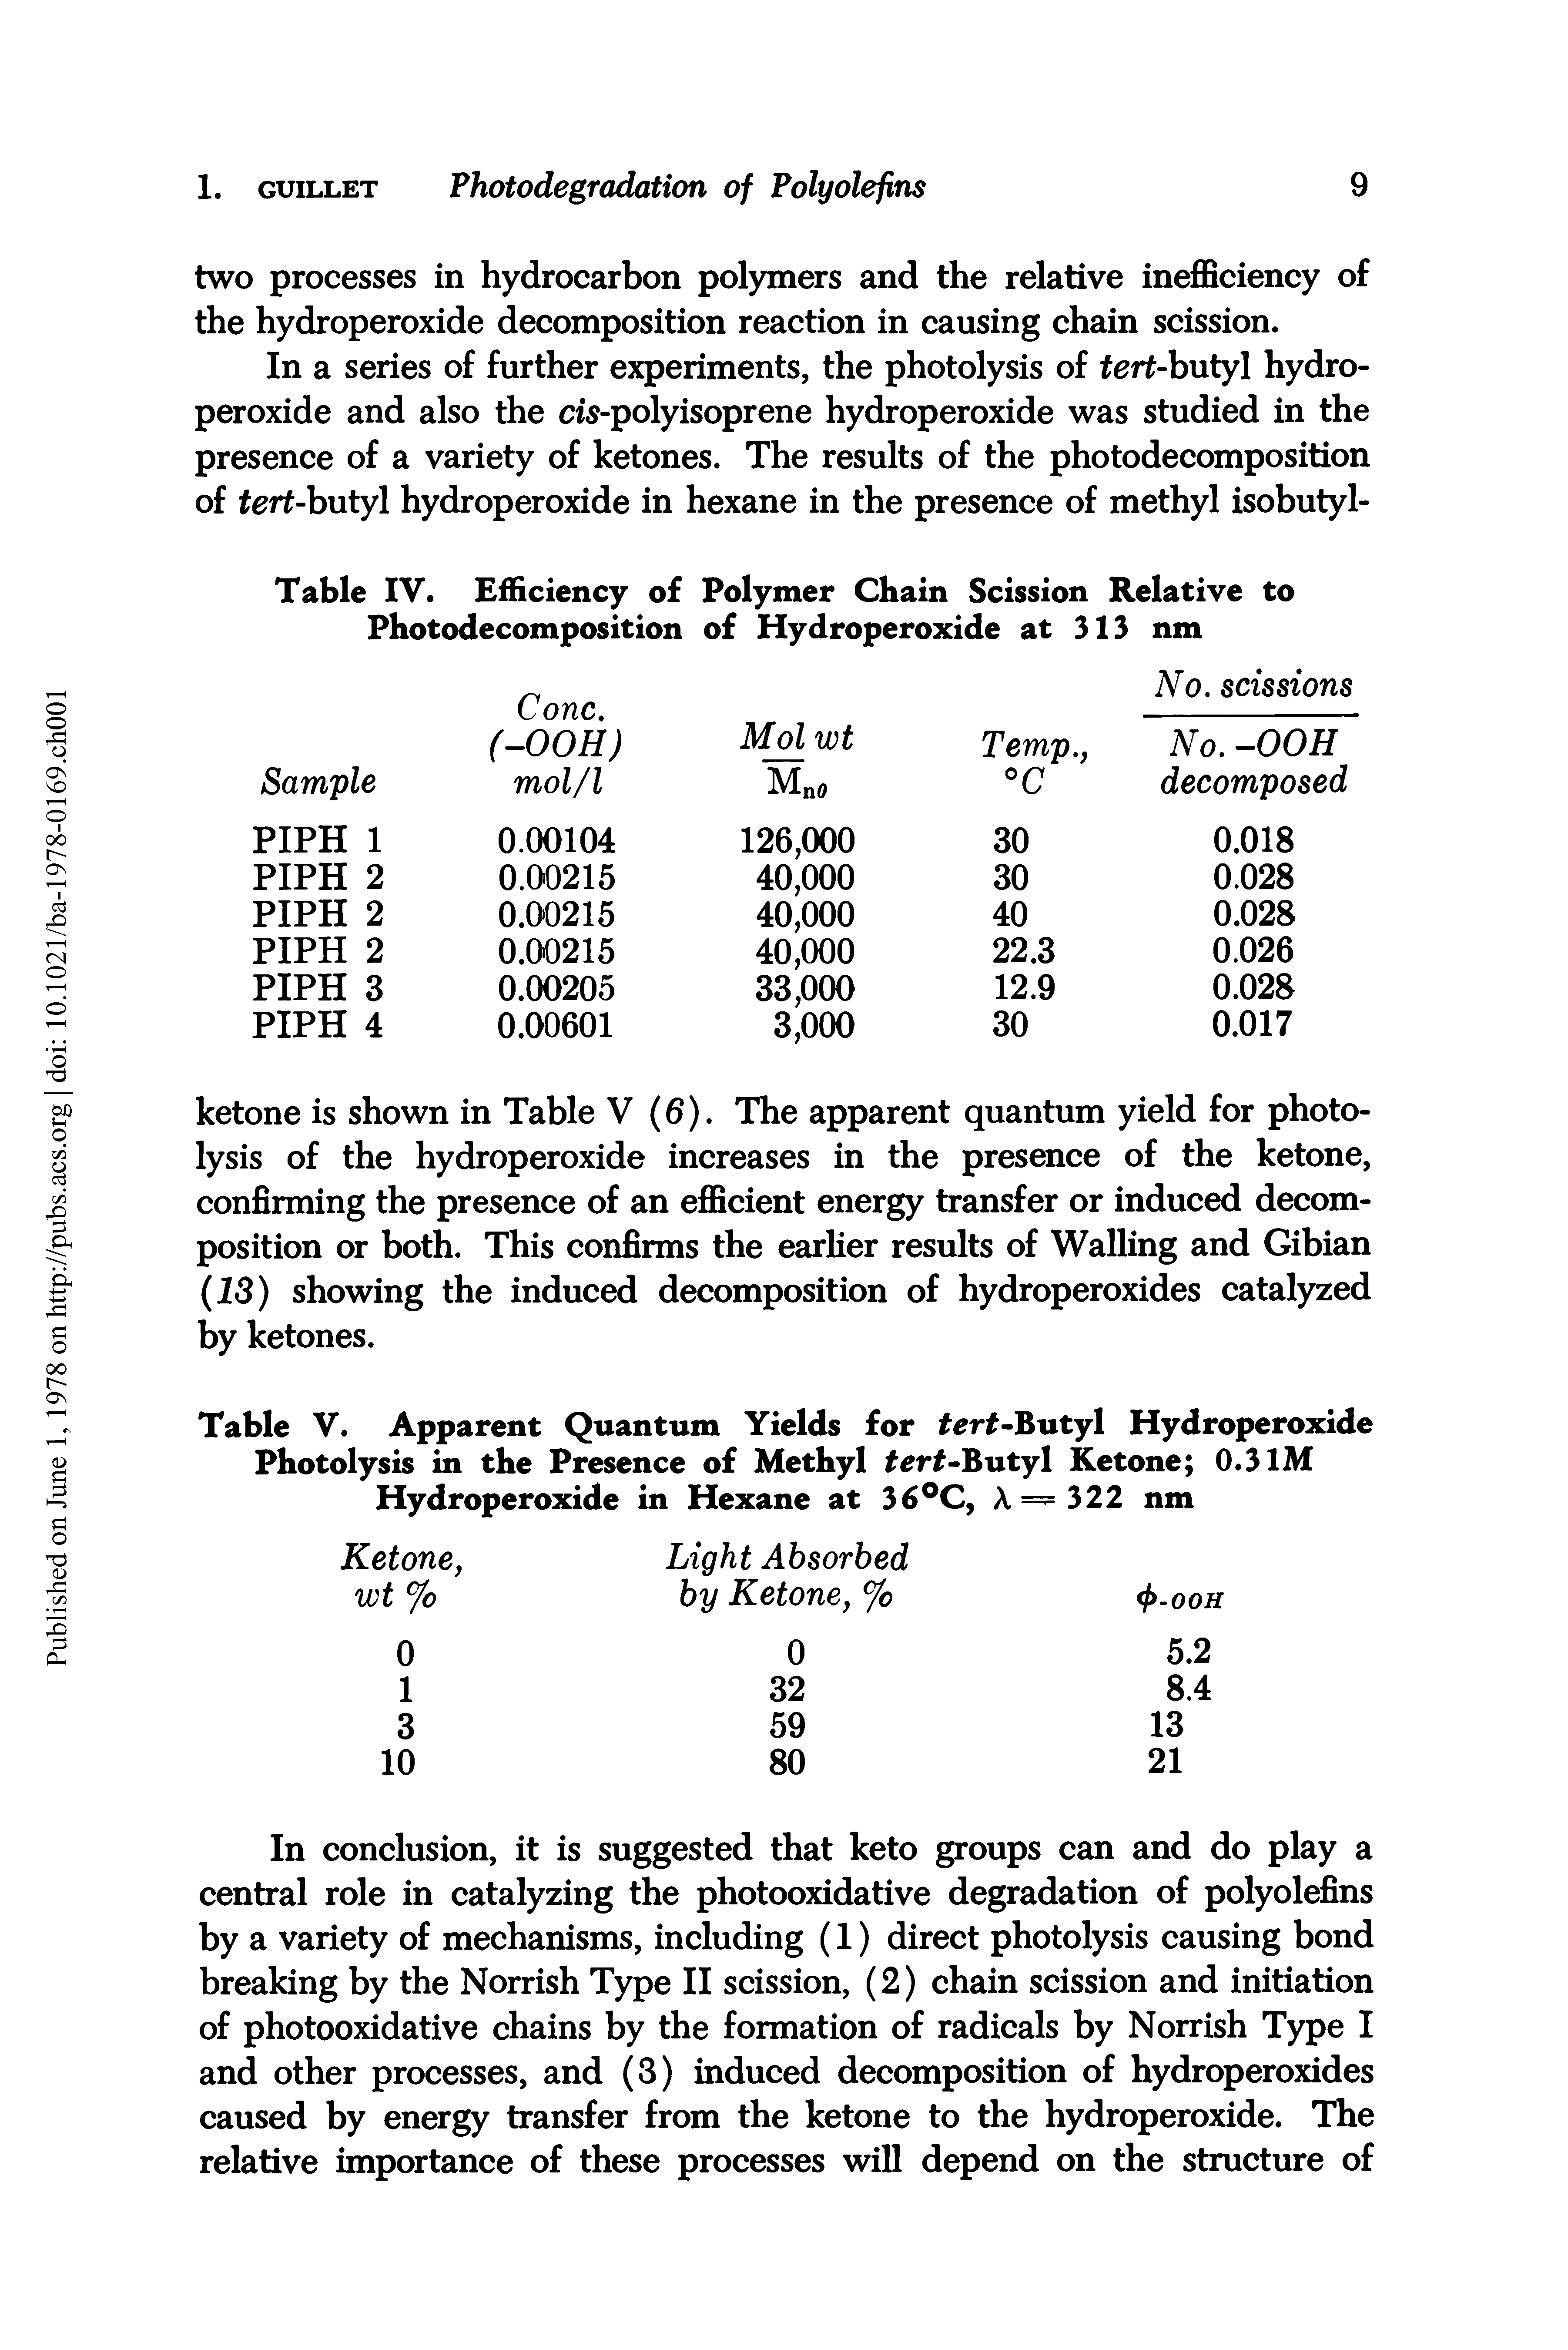 Table V. Apparent Quantum Yields for tert-Butyl Hydroperoxide Photolysis in the Presence of Methyl tert-Butyl Ketone 0.31M Hydroperoxide in Hexane at 36°C, A — 322 nm...